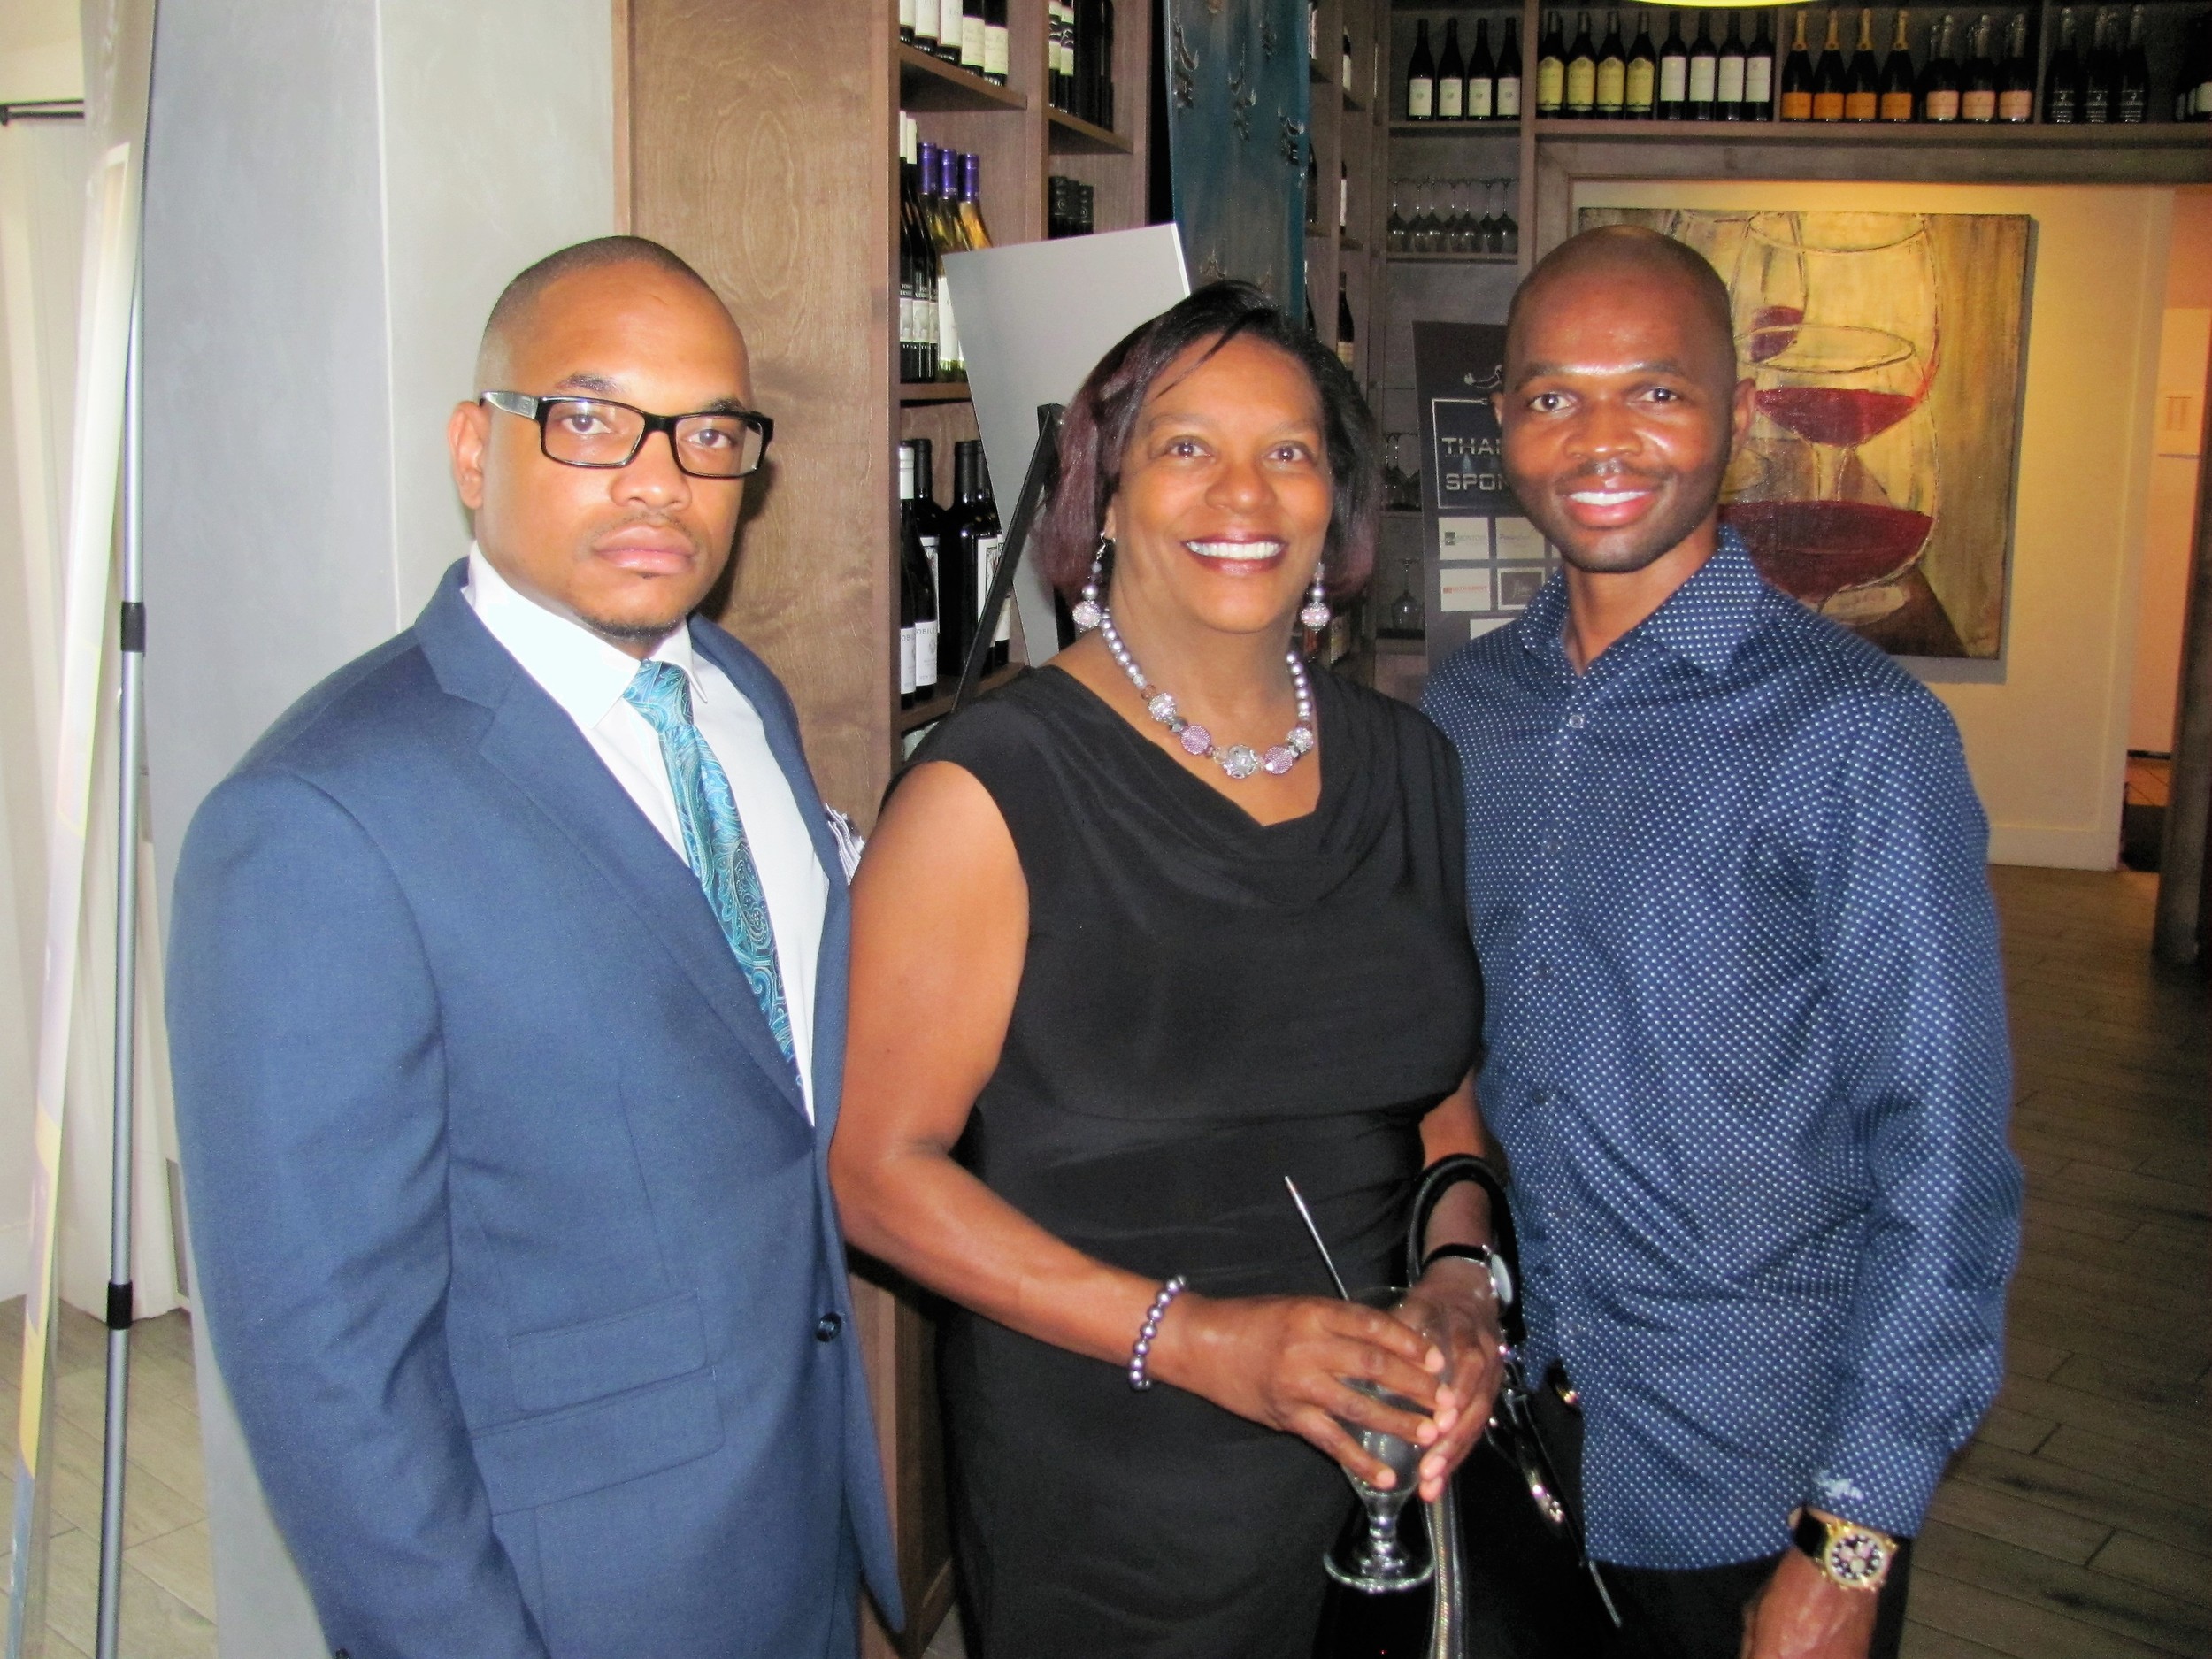 Howard Edwards, Pam Denson and Cedric Griffin